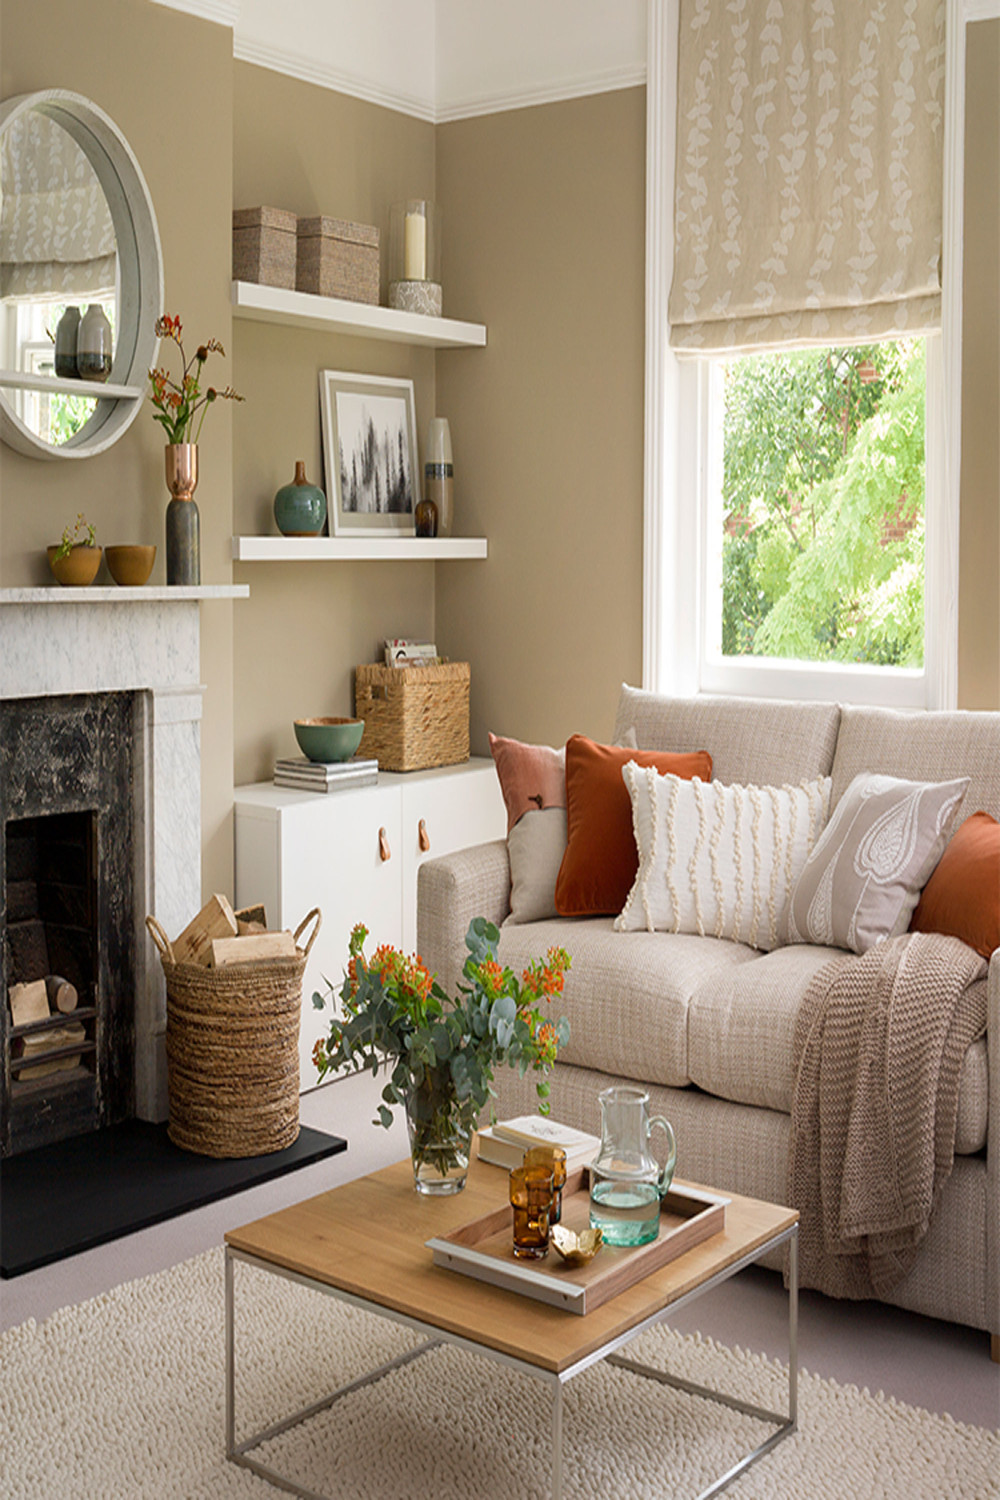 Beige living room ideas - stay neutral with this easygoing